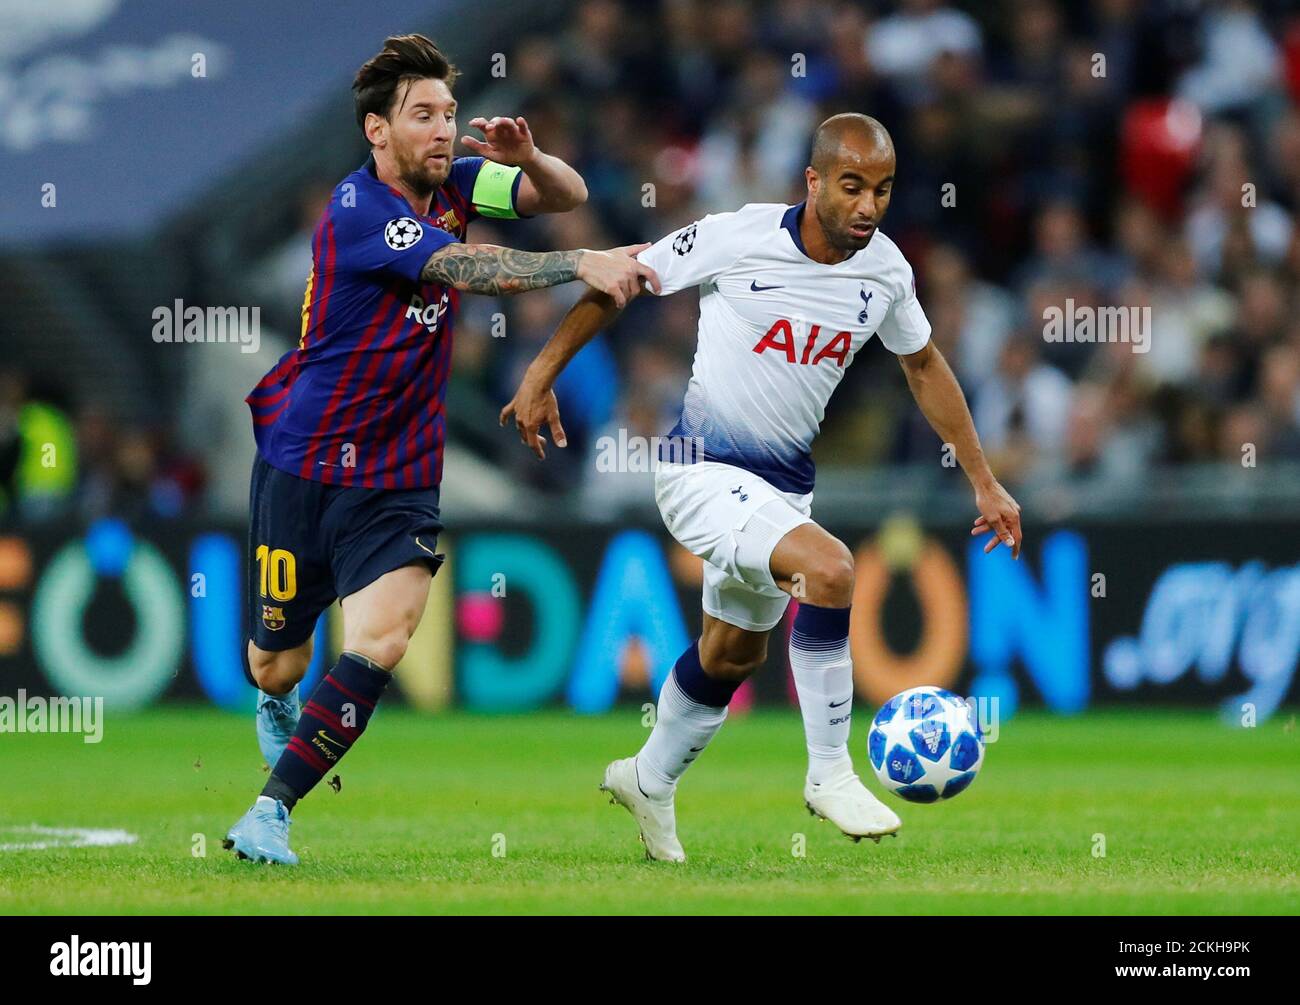 Soccer Football - Champions League - Group Stage - Group B - Tottenham Hotspur v FC Barcelona - Wembley Stadium, London, Britain - October 3, 2018  Barcelona's Lionel Messi in action with Tottenham's Lucas Moura       REUTERS/Eddie Keogh Stock Photo